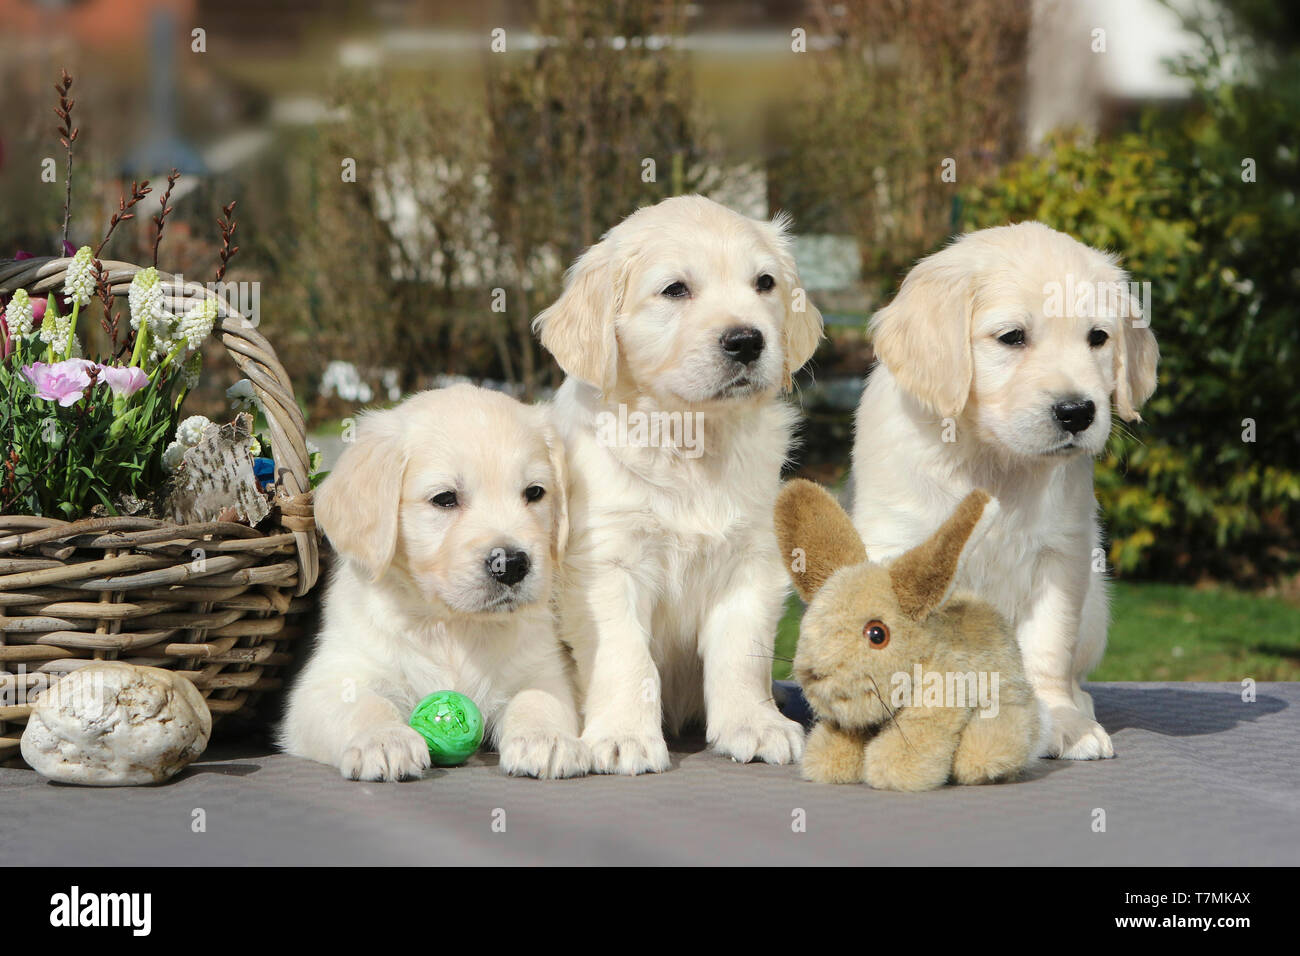 Golden Retriever. Three puppies (females, 7 weeks old) with plush bunny and flower basket. Germany Stock Photo